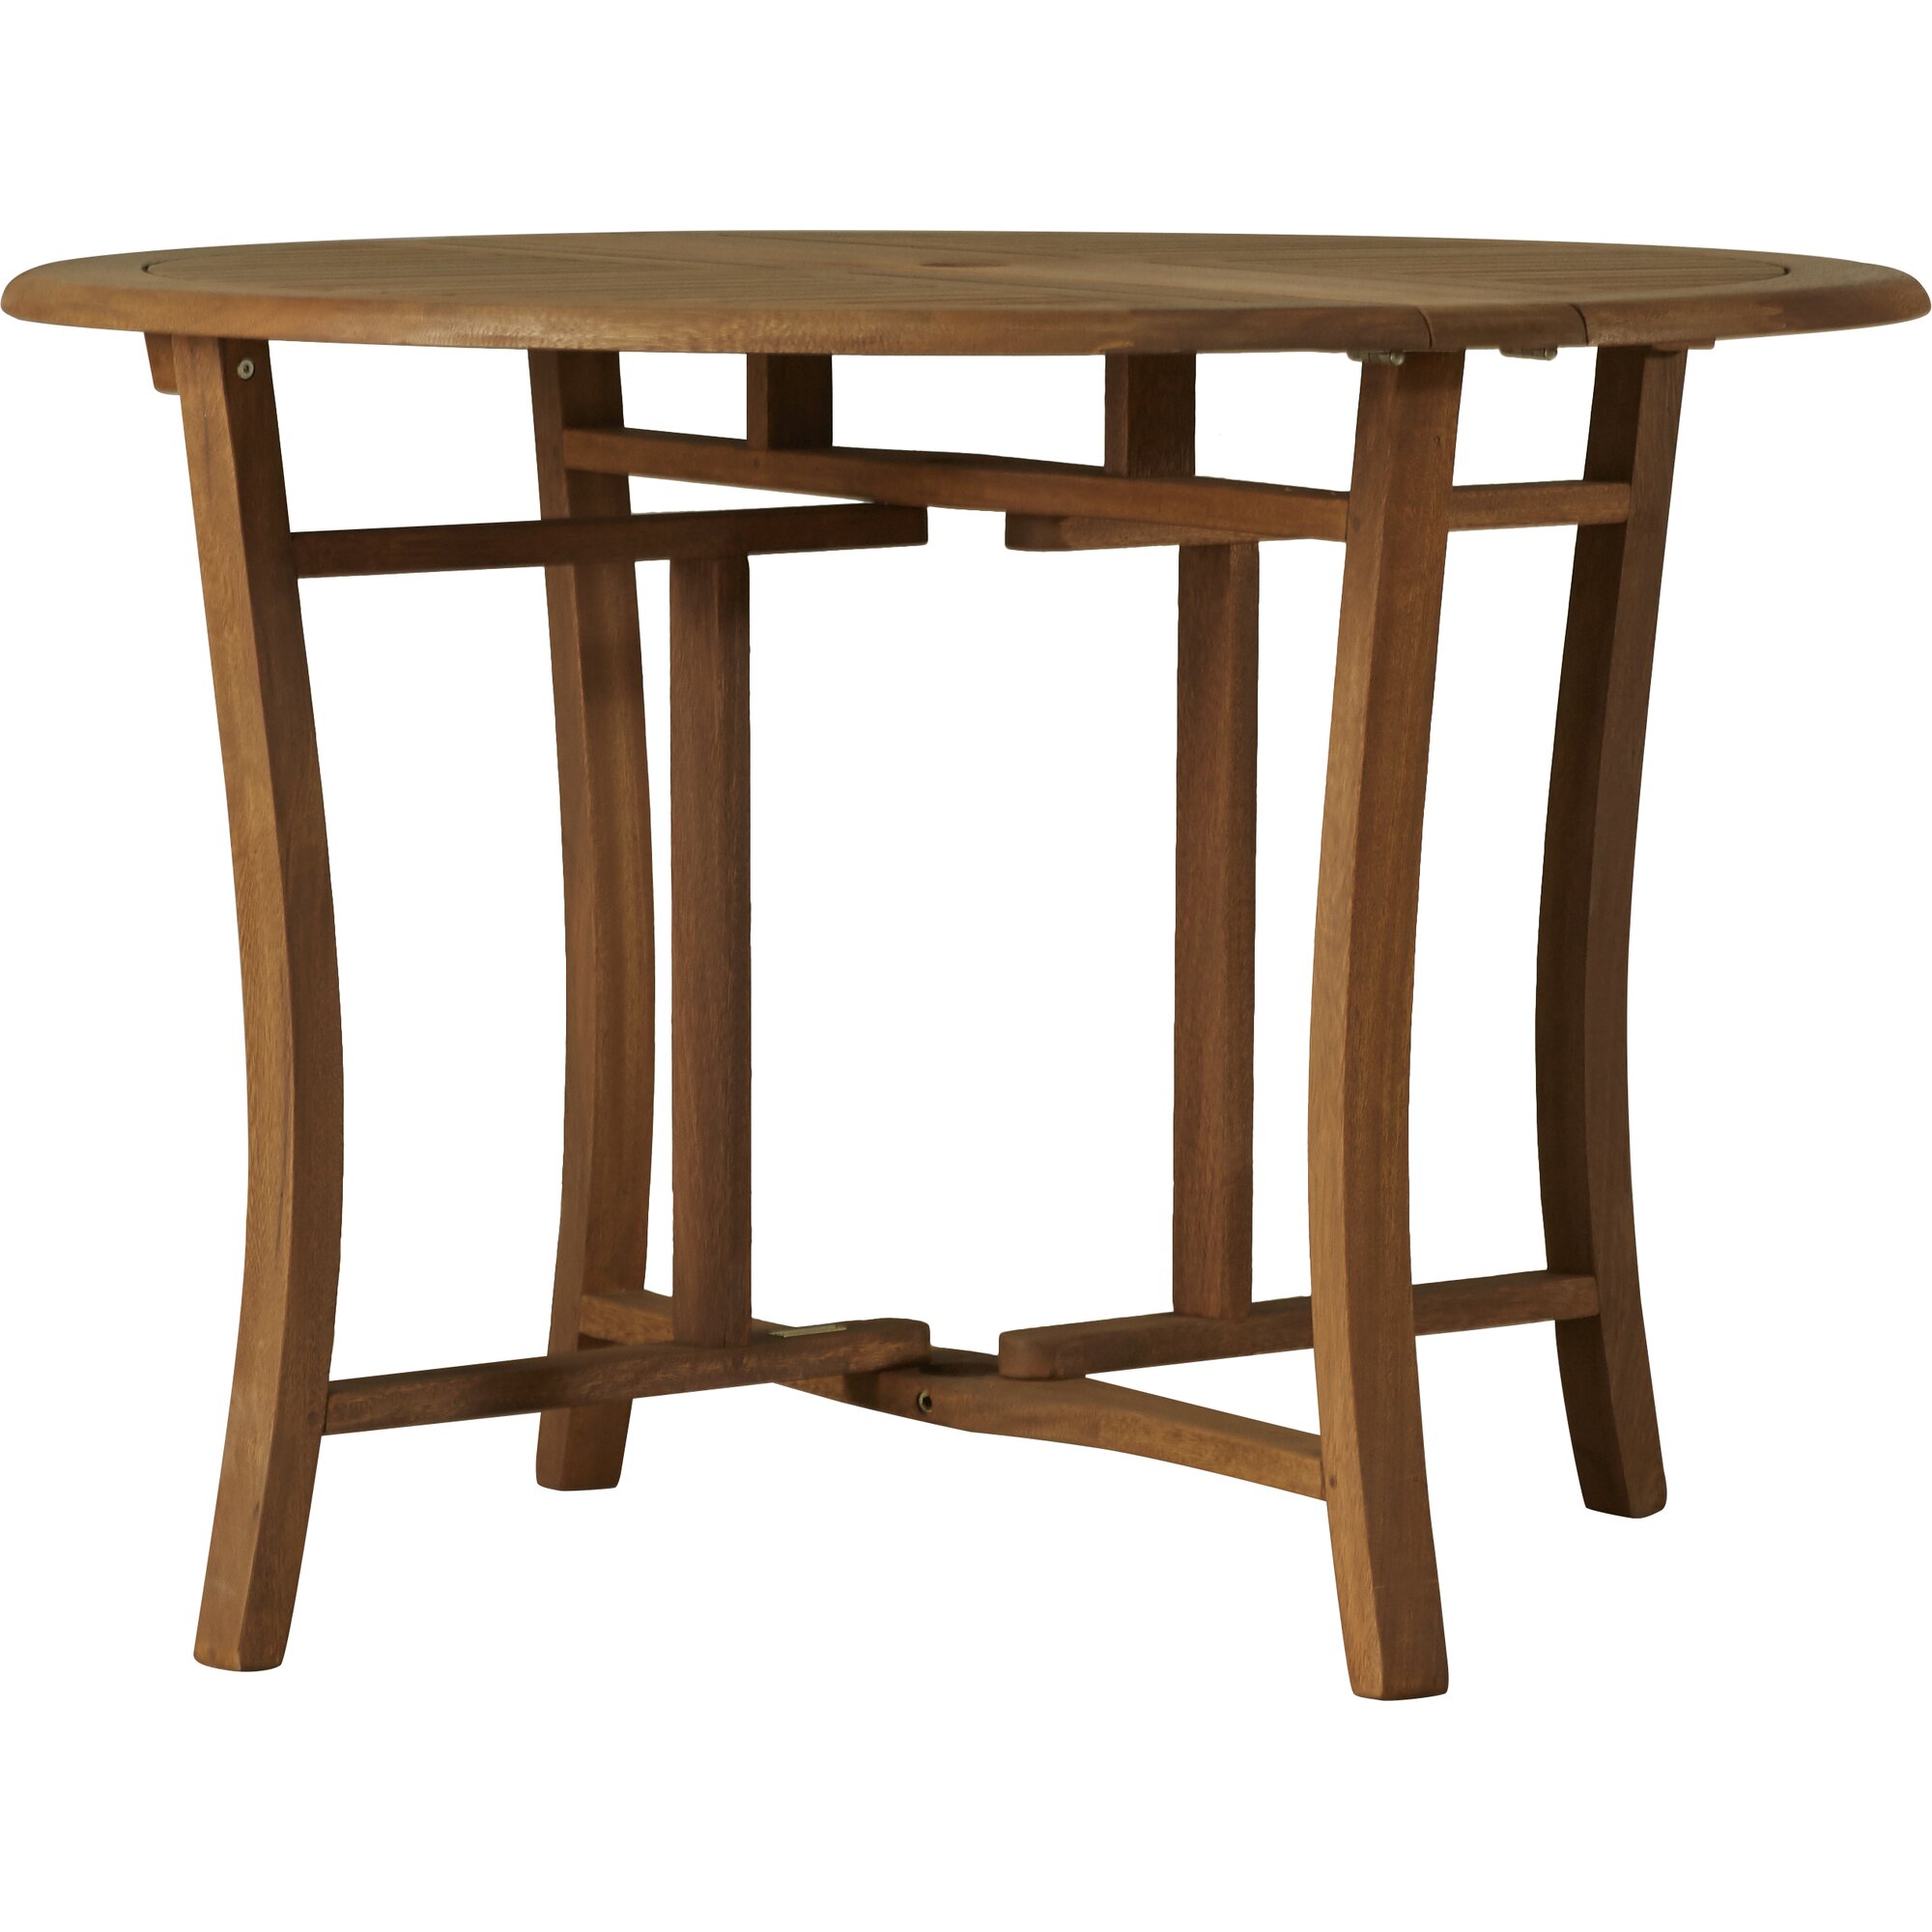 Hudgins Folding Wooden Dining Table